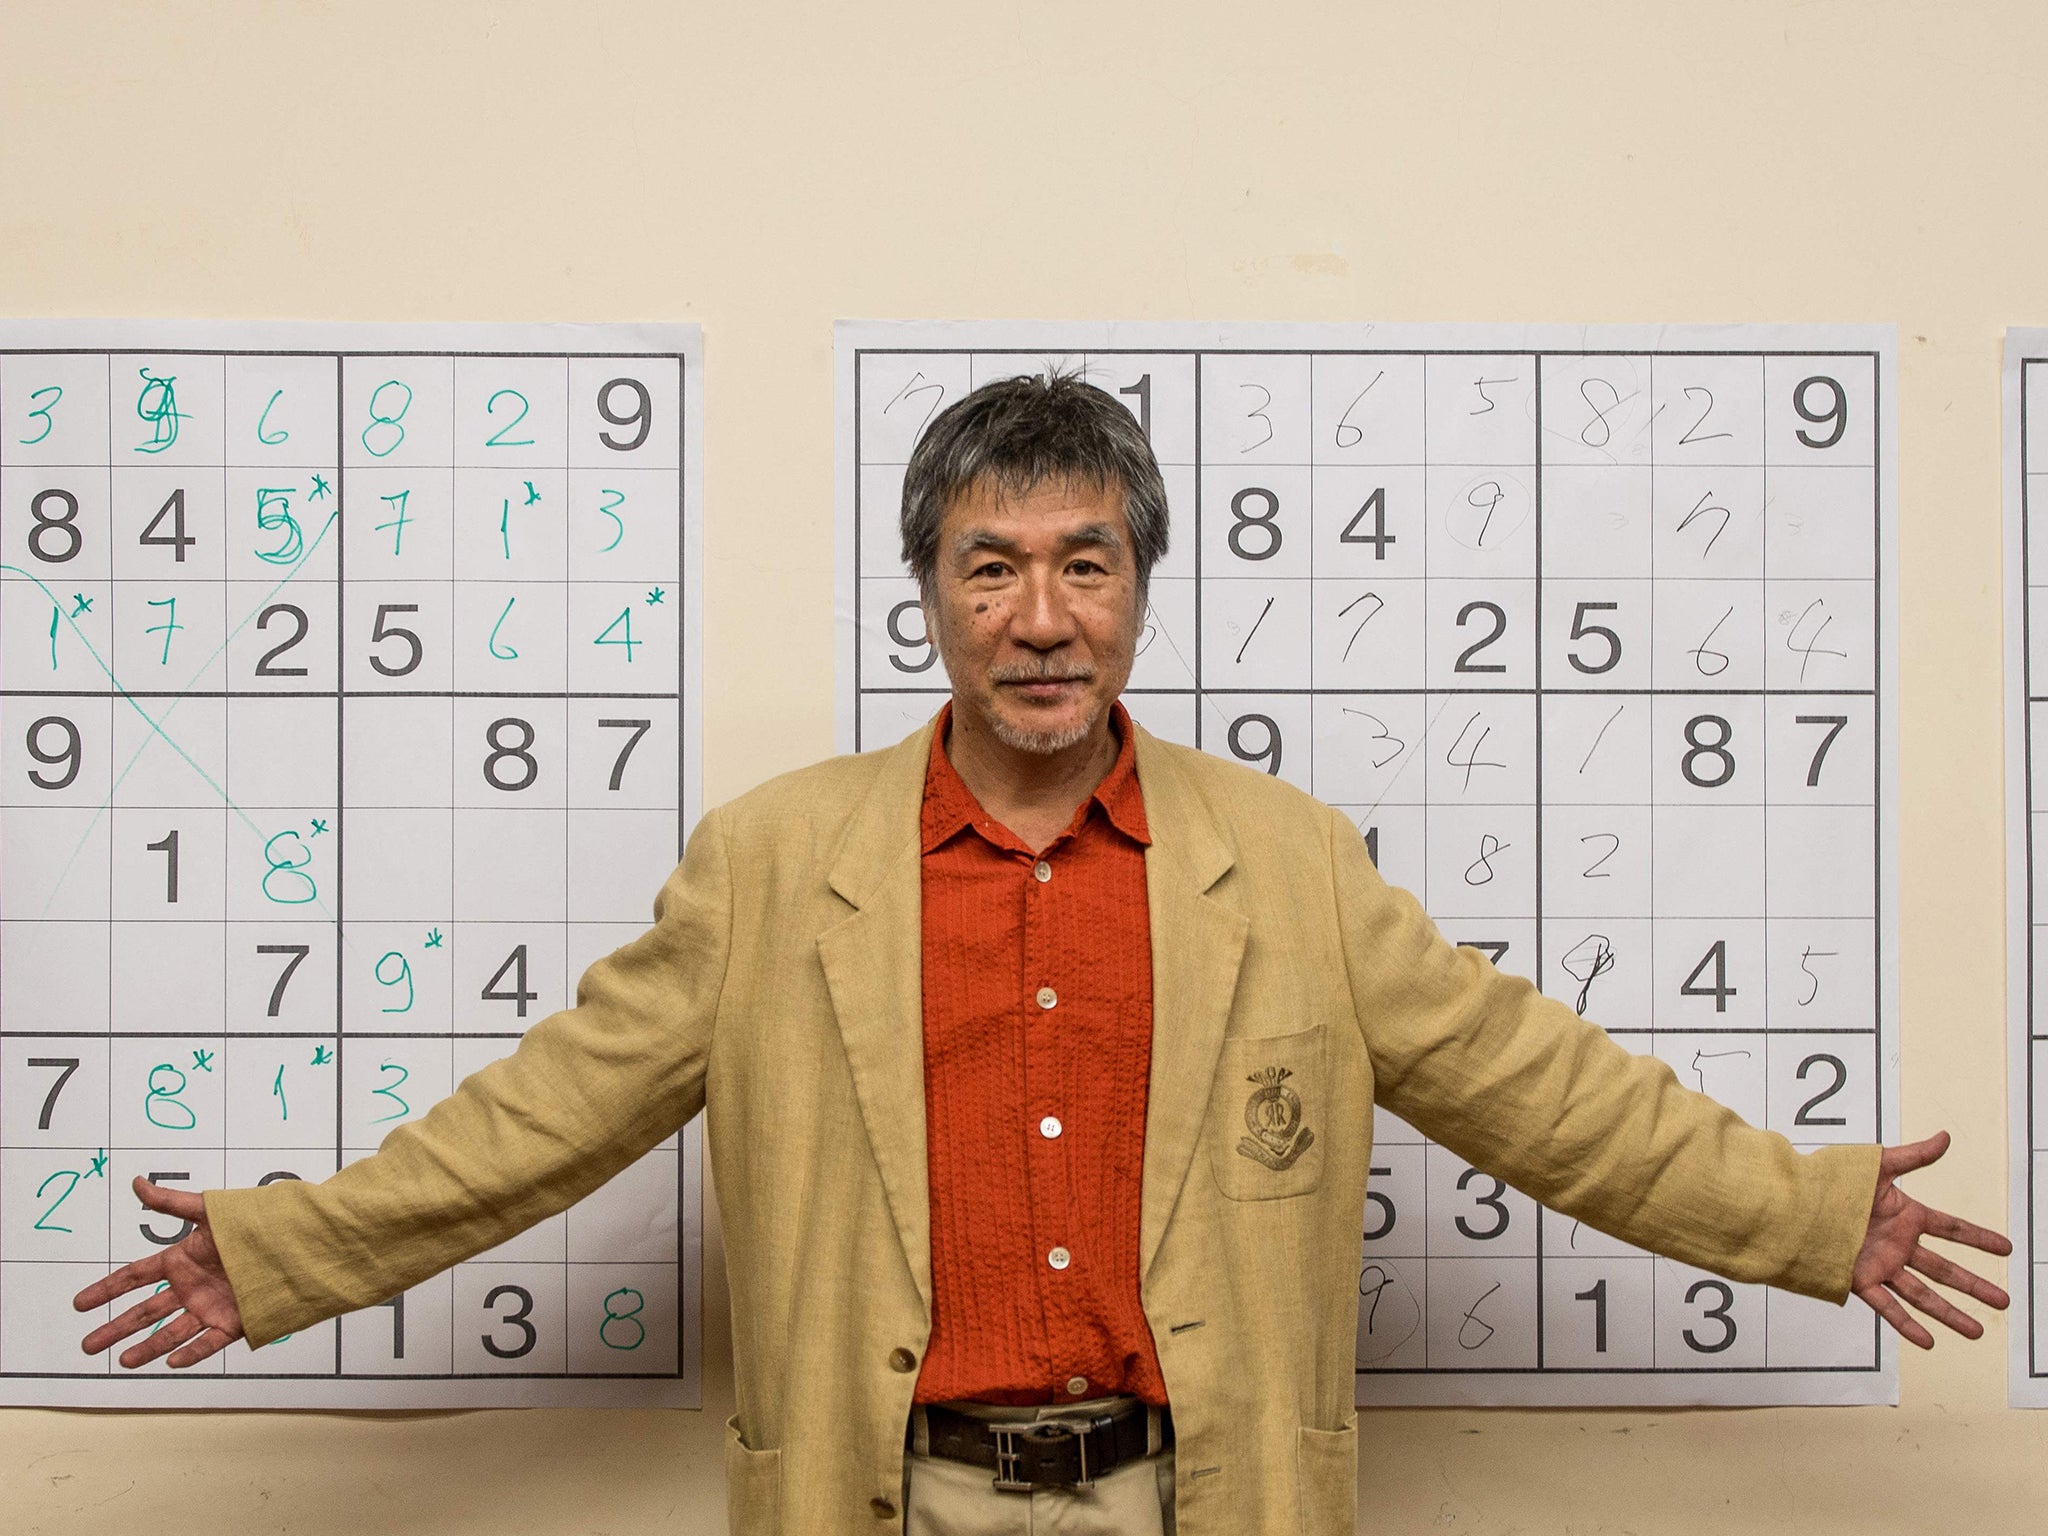 Despite the global success of Sudoku, Kaji never trademarked his game outside of Japan and as a result, never gained that much financially